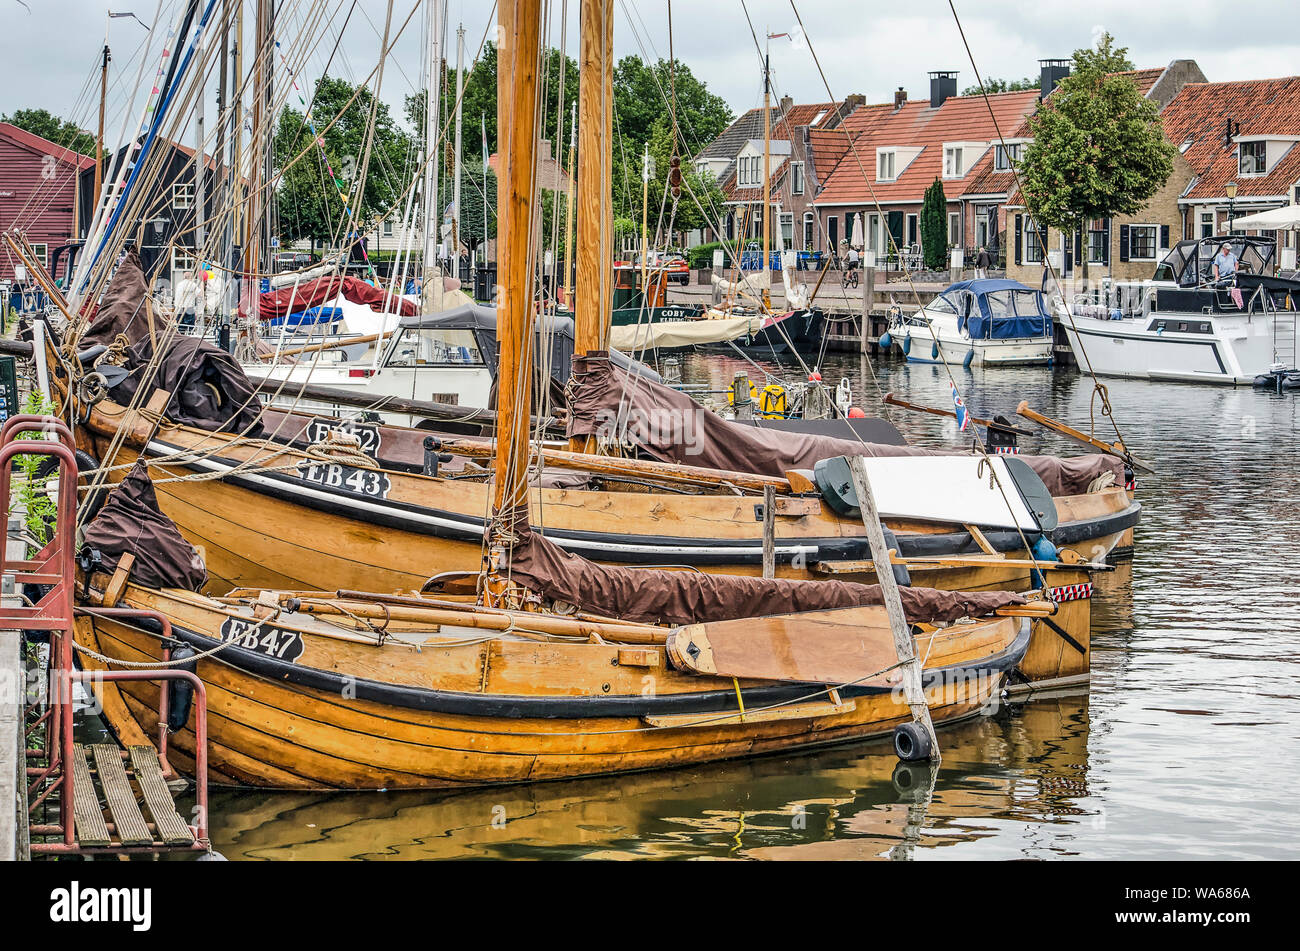 Elburg, The Netherlands, August 3, 2019: historic wooden fishing boats in the old town's harbour Stock Photo